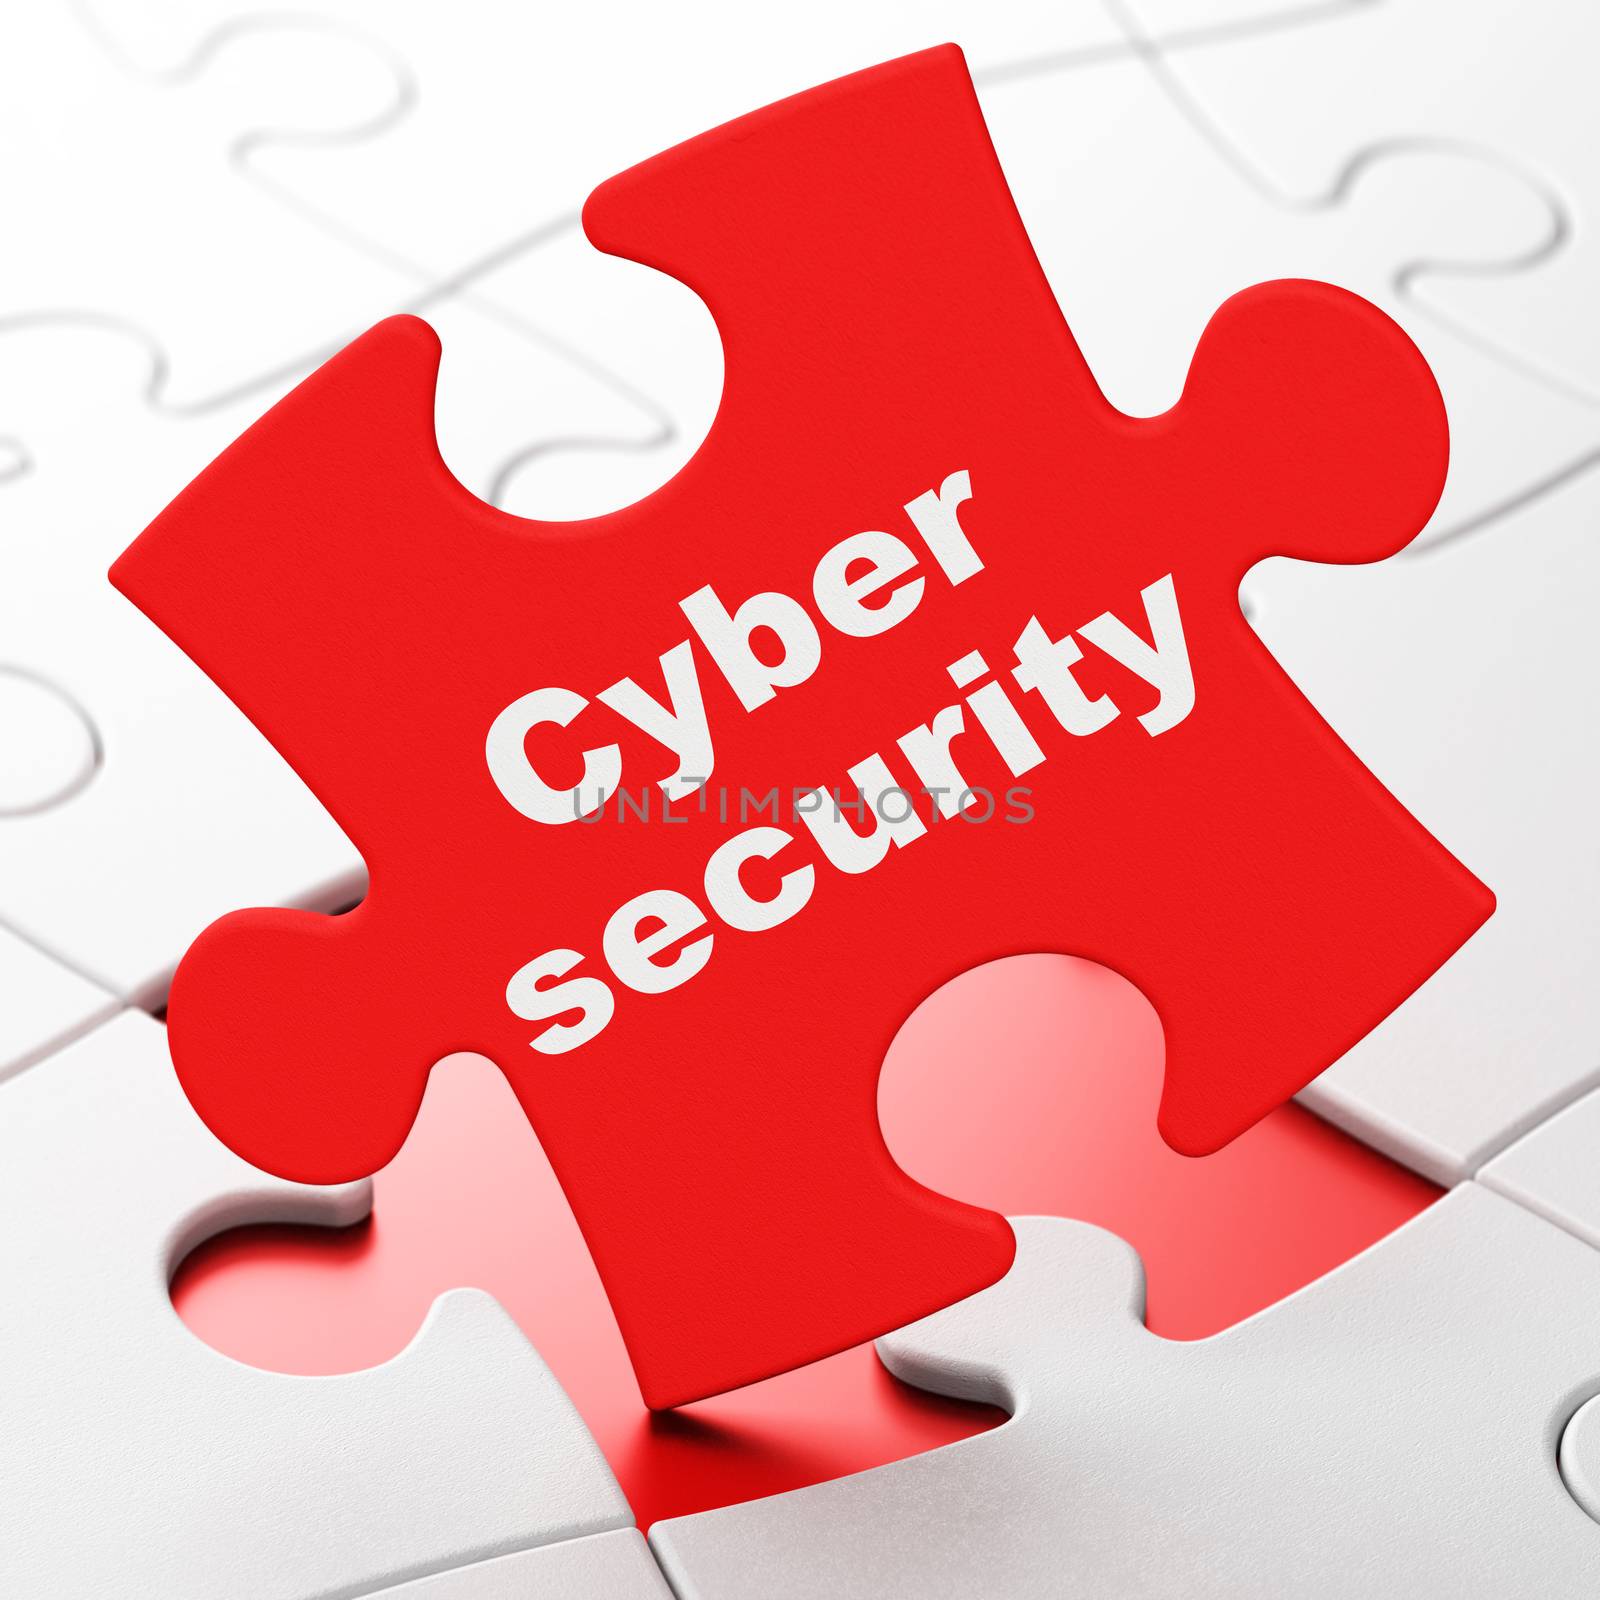 Privacy concept: Cyber Security on Red puzzle pieces background, 3D rendering